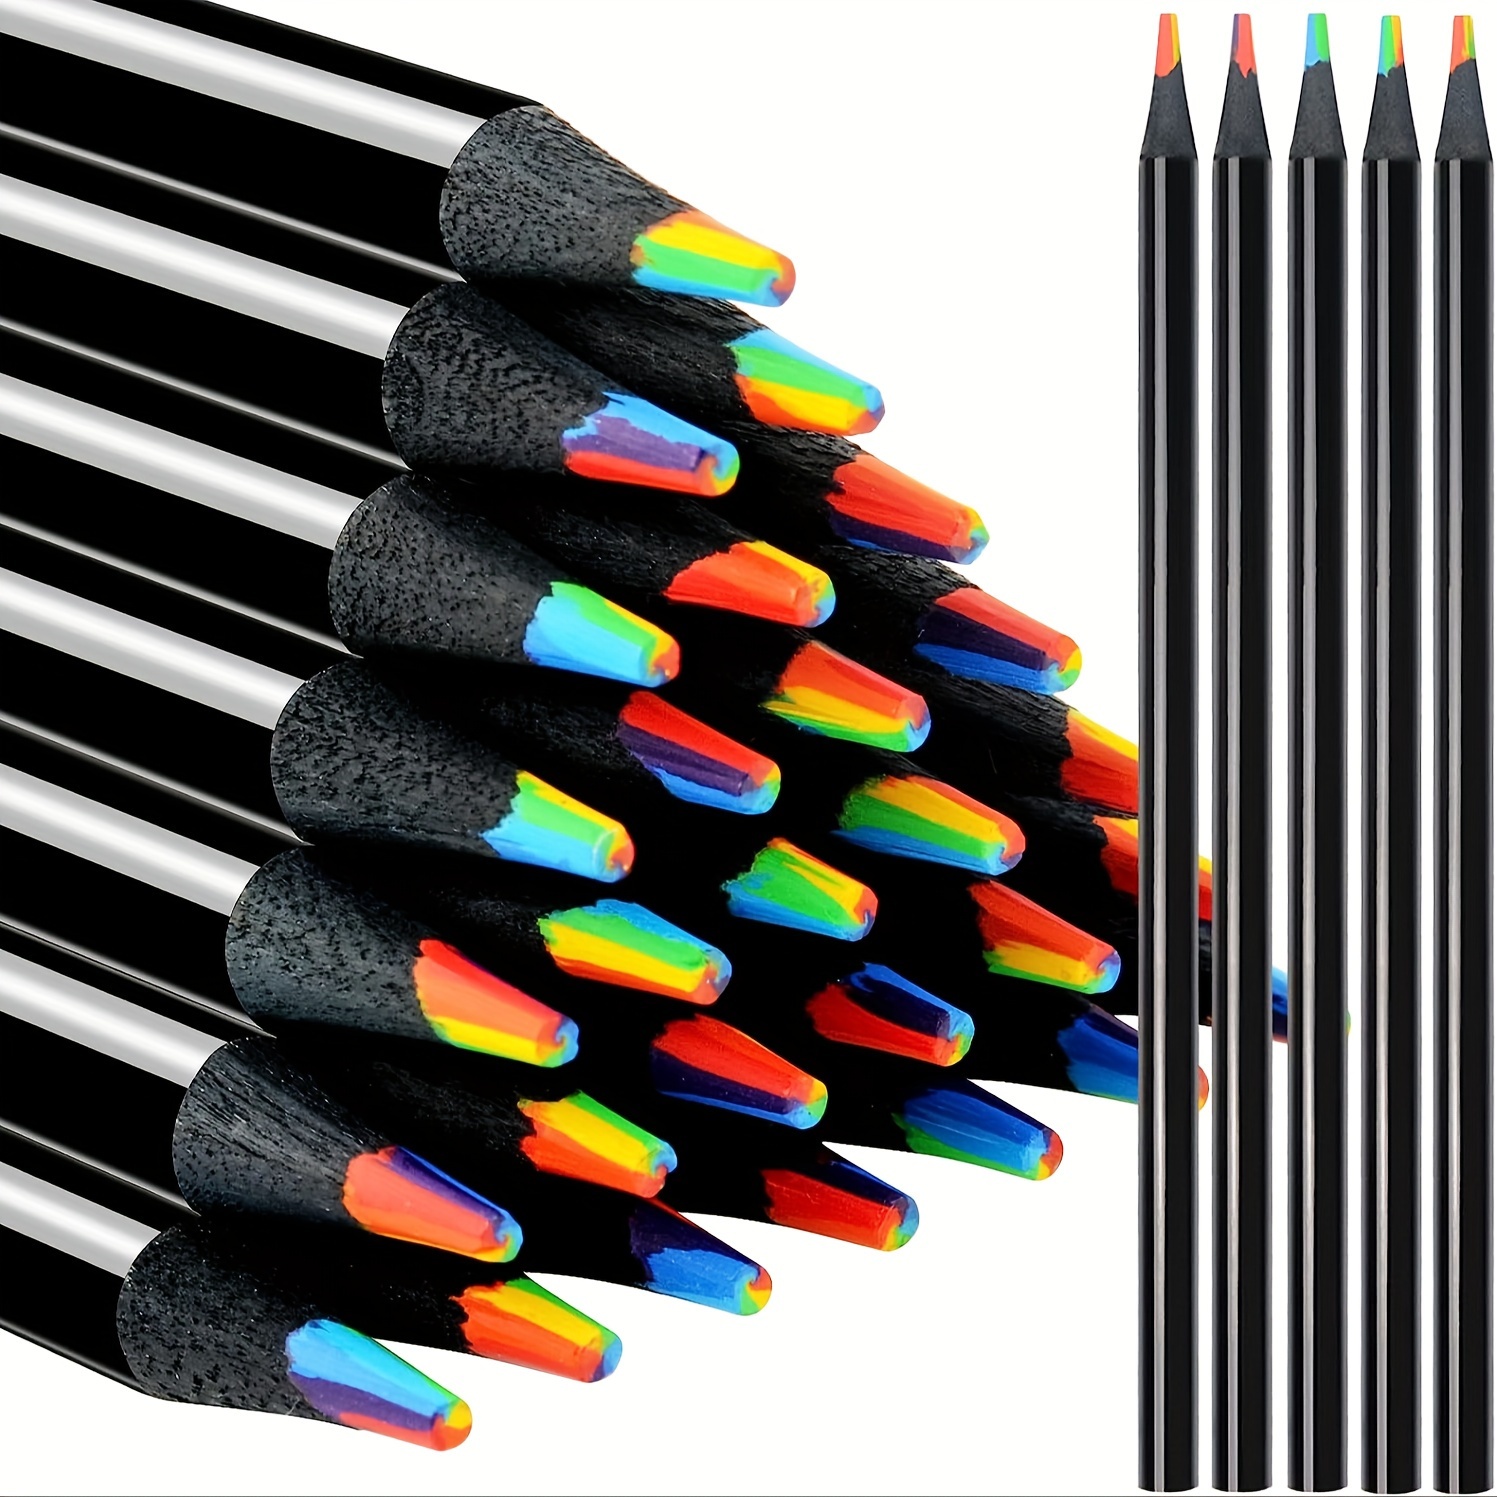  nsxsu 8 Pieces Rainbow Pencils, Jumbo Colored Pencils for  Adults, Multicolored Pencils Art Supplies for Drawing, Coloring, Sketching,  Pre-sharpened : Everything Else